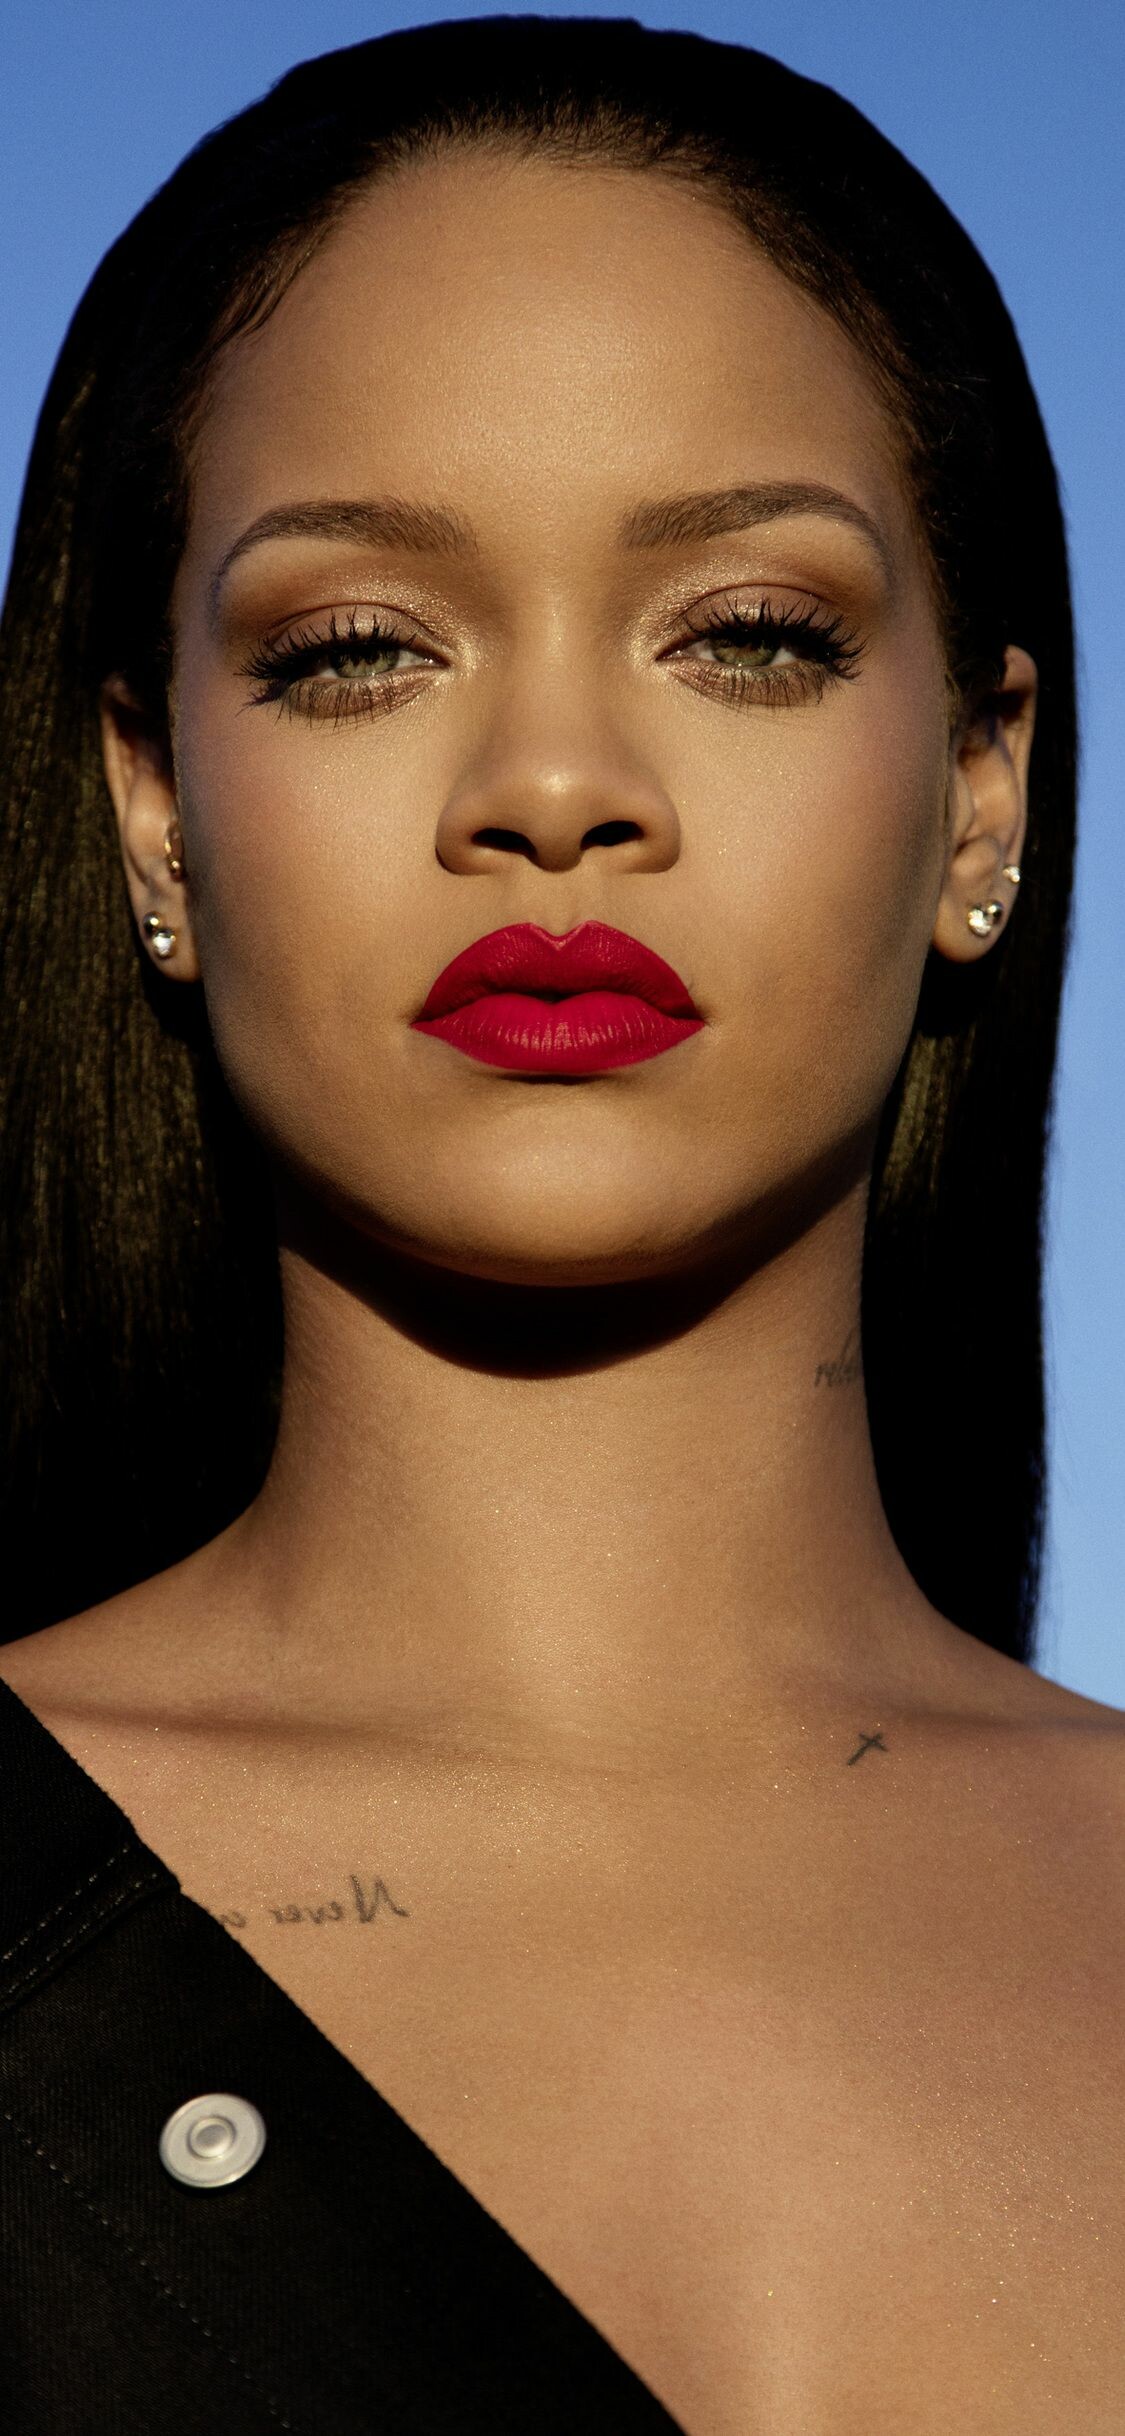 Rihanna: One of the most consistent hit makers in pop music for her chart-topping seven albums. 1130x2440 HD Background.